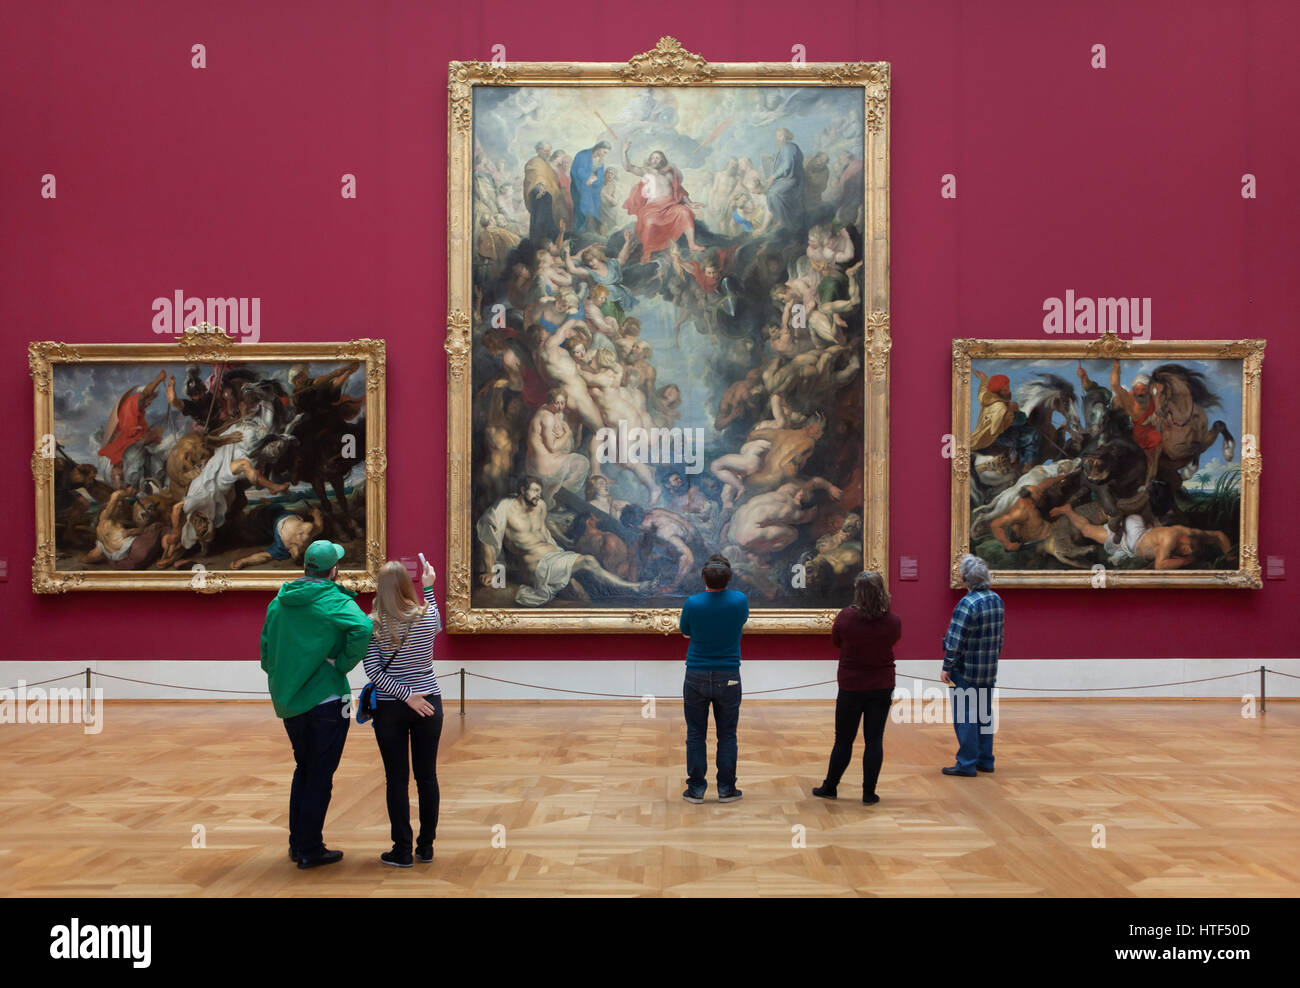 Visitors in front of the paintings by Flemish painter Peter Paul Rubens displayed in the Alte Pinakothek (Old Pinacotheca) in Munich, Bavaria, Germany. Paintings Lion Hunt (1621), The Great Last Judgement (1617) and The Hippopotamus and Crocodile Hunt (1616) by Peter Paul Rubens are depicted from left to right. Stock Photo